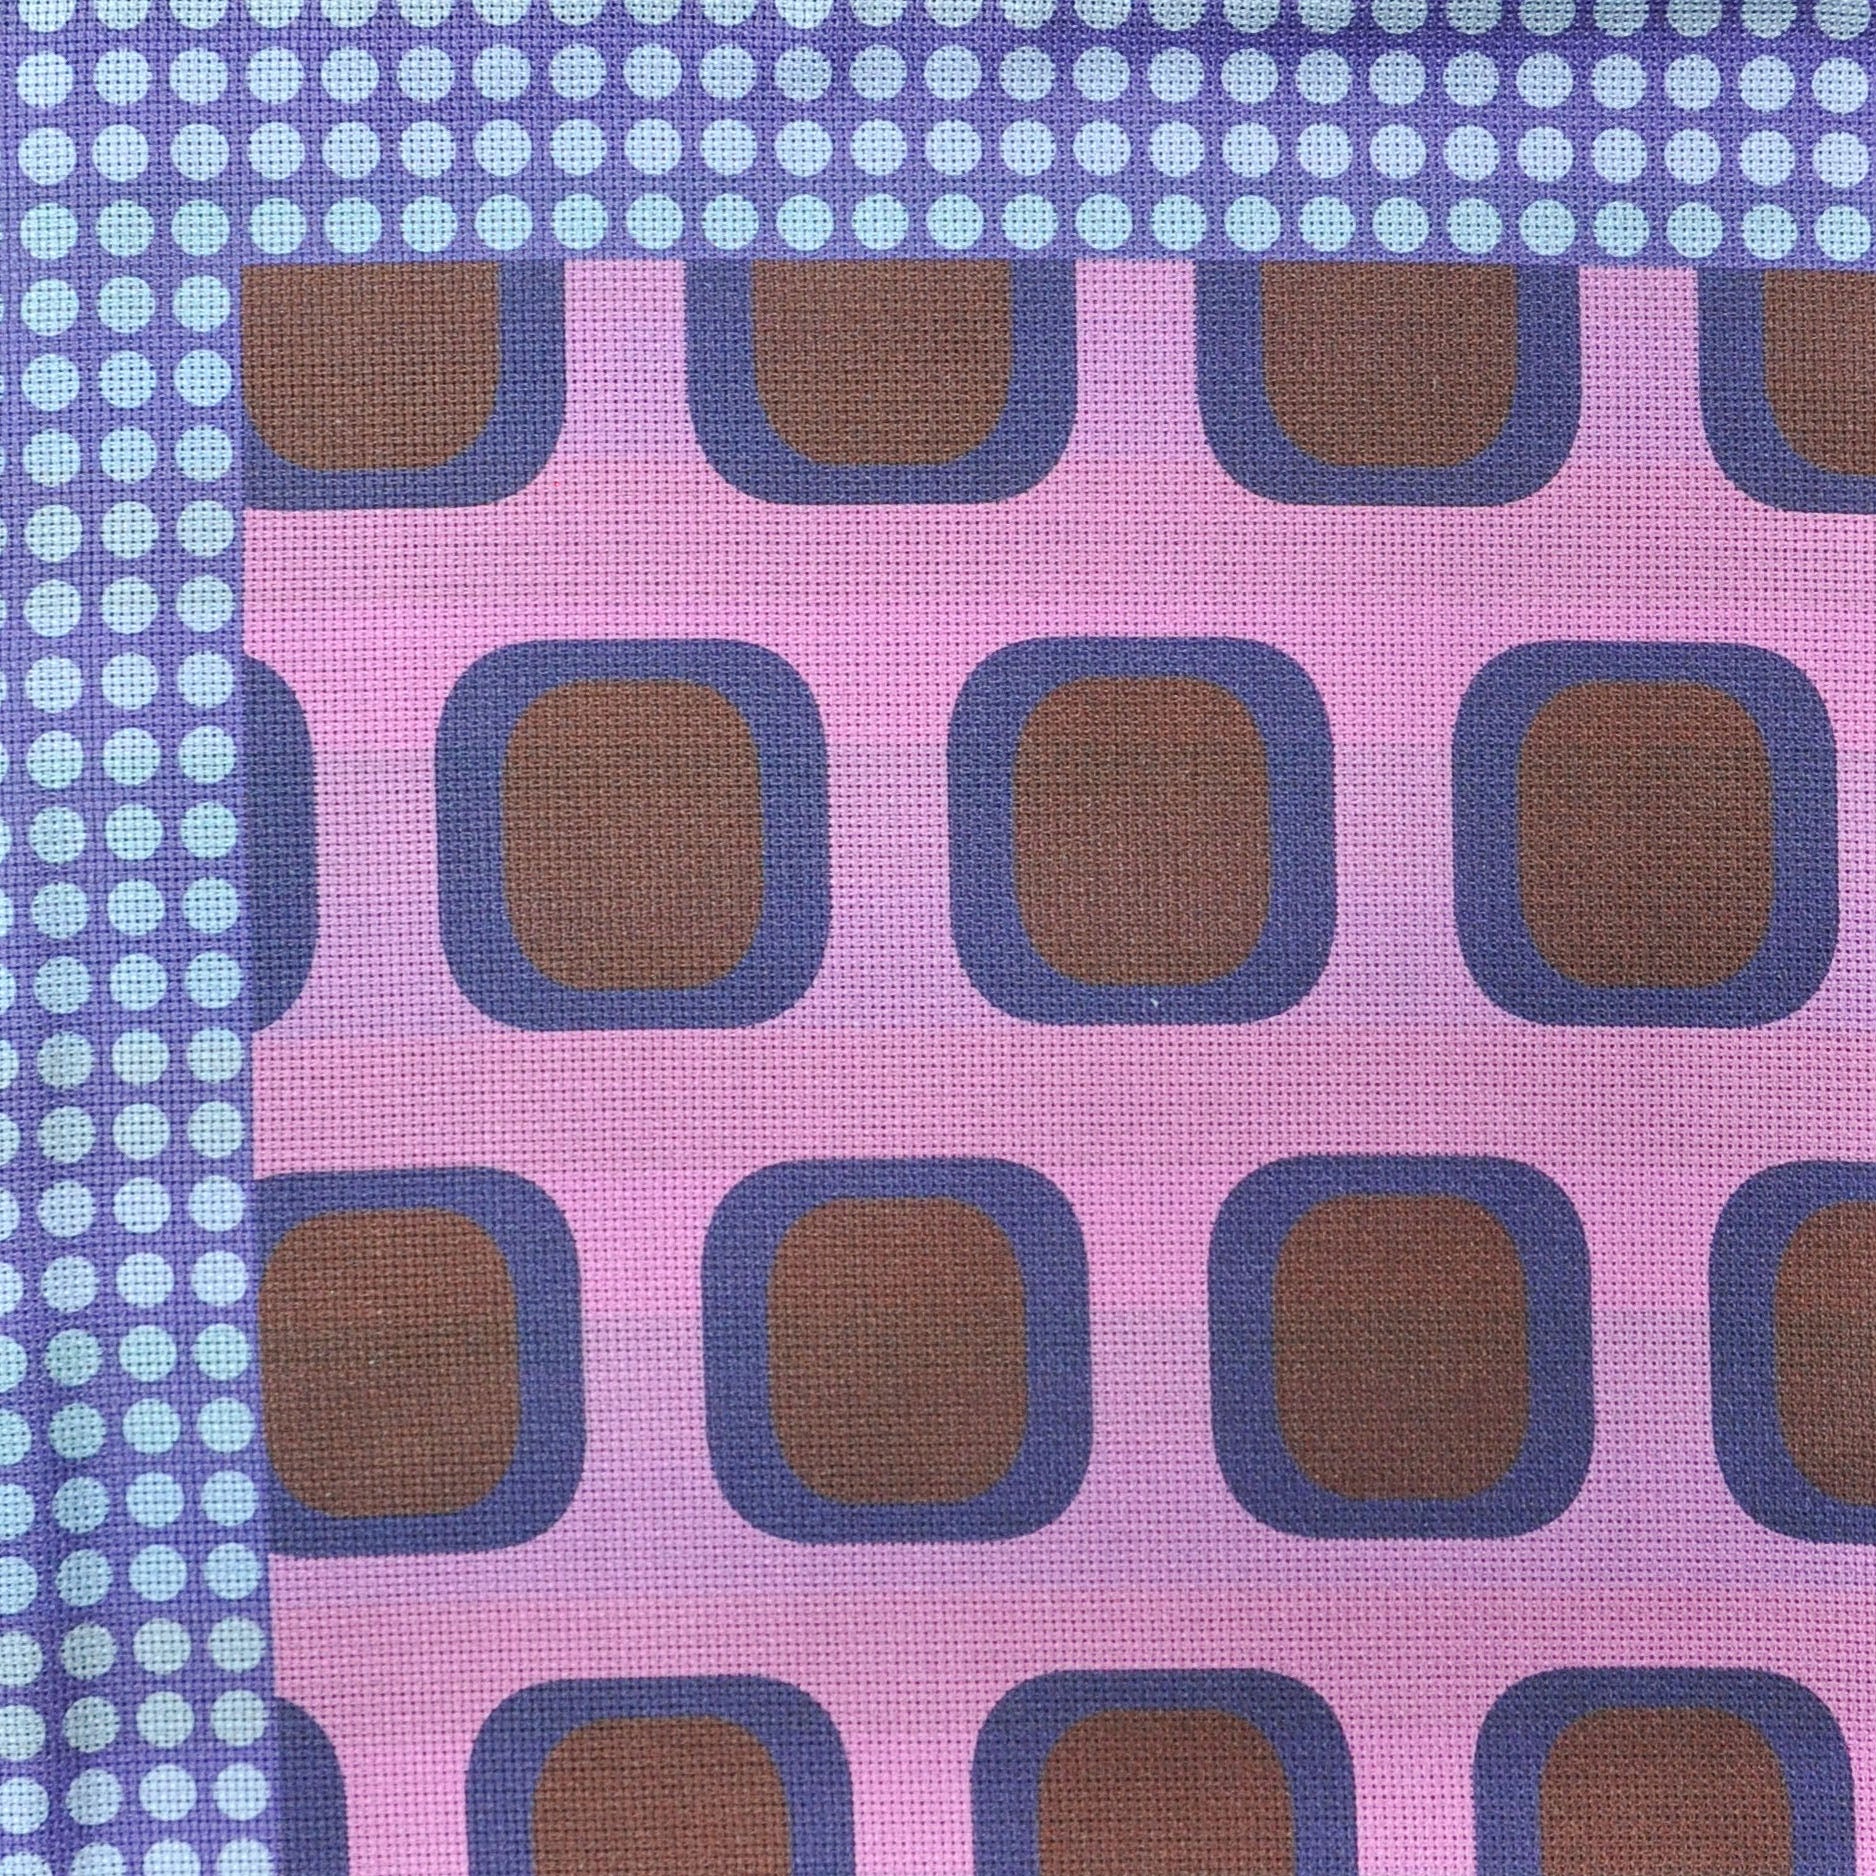 Dots, Geo's & Stripes Reversible Panama Silk Pocket Square in Pink, Blue & Brown